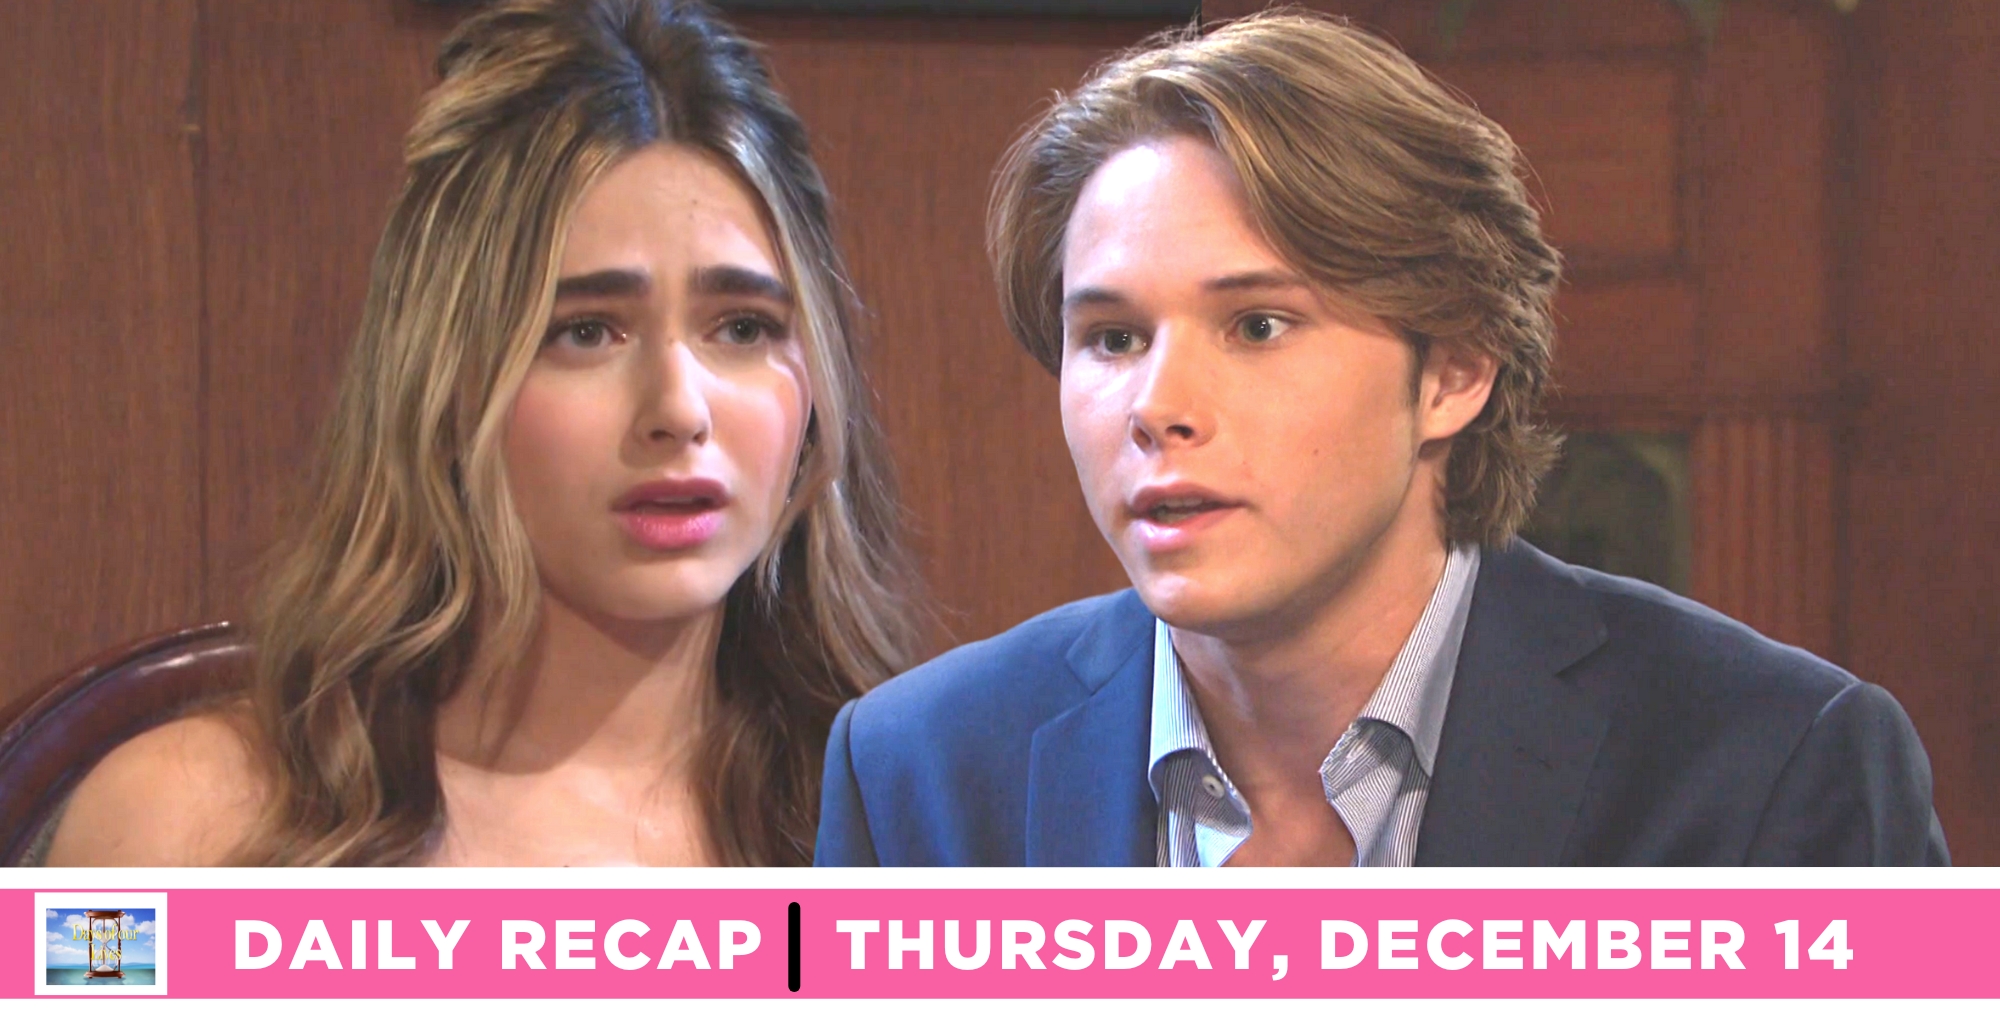 tate black told holly jonas exactly what she needed to hear on days of our lives recap for thurssday, december 14, 2023.